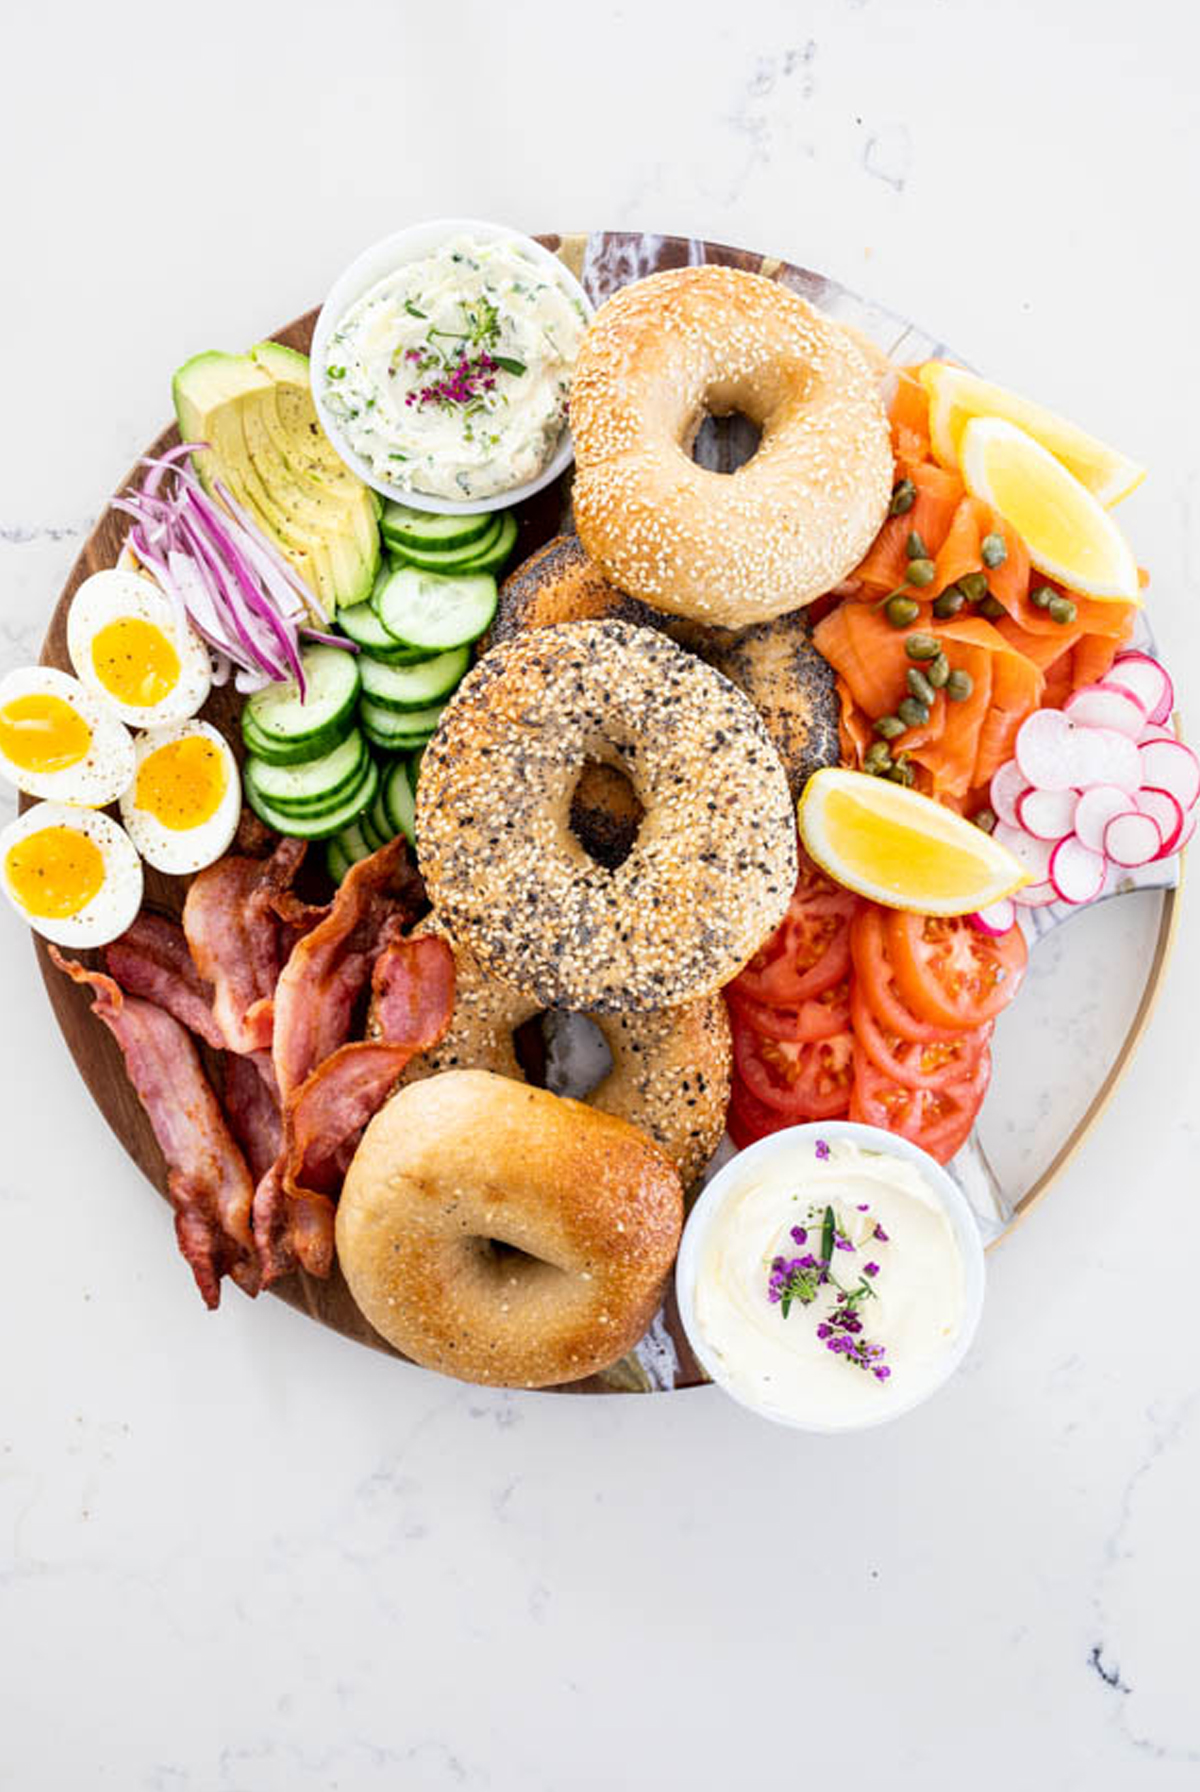 simply delicious food created a board with a variety of bagels, toppings, and cream cheese spreads.